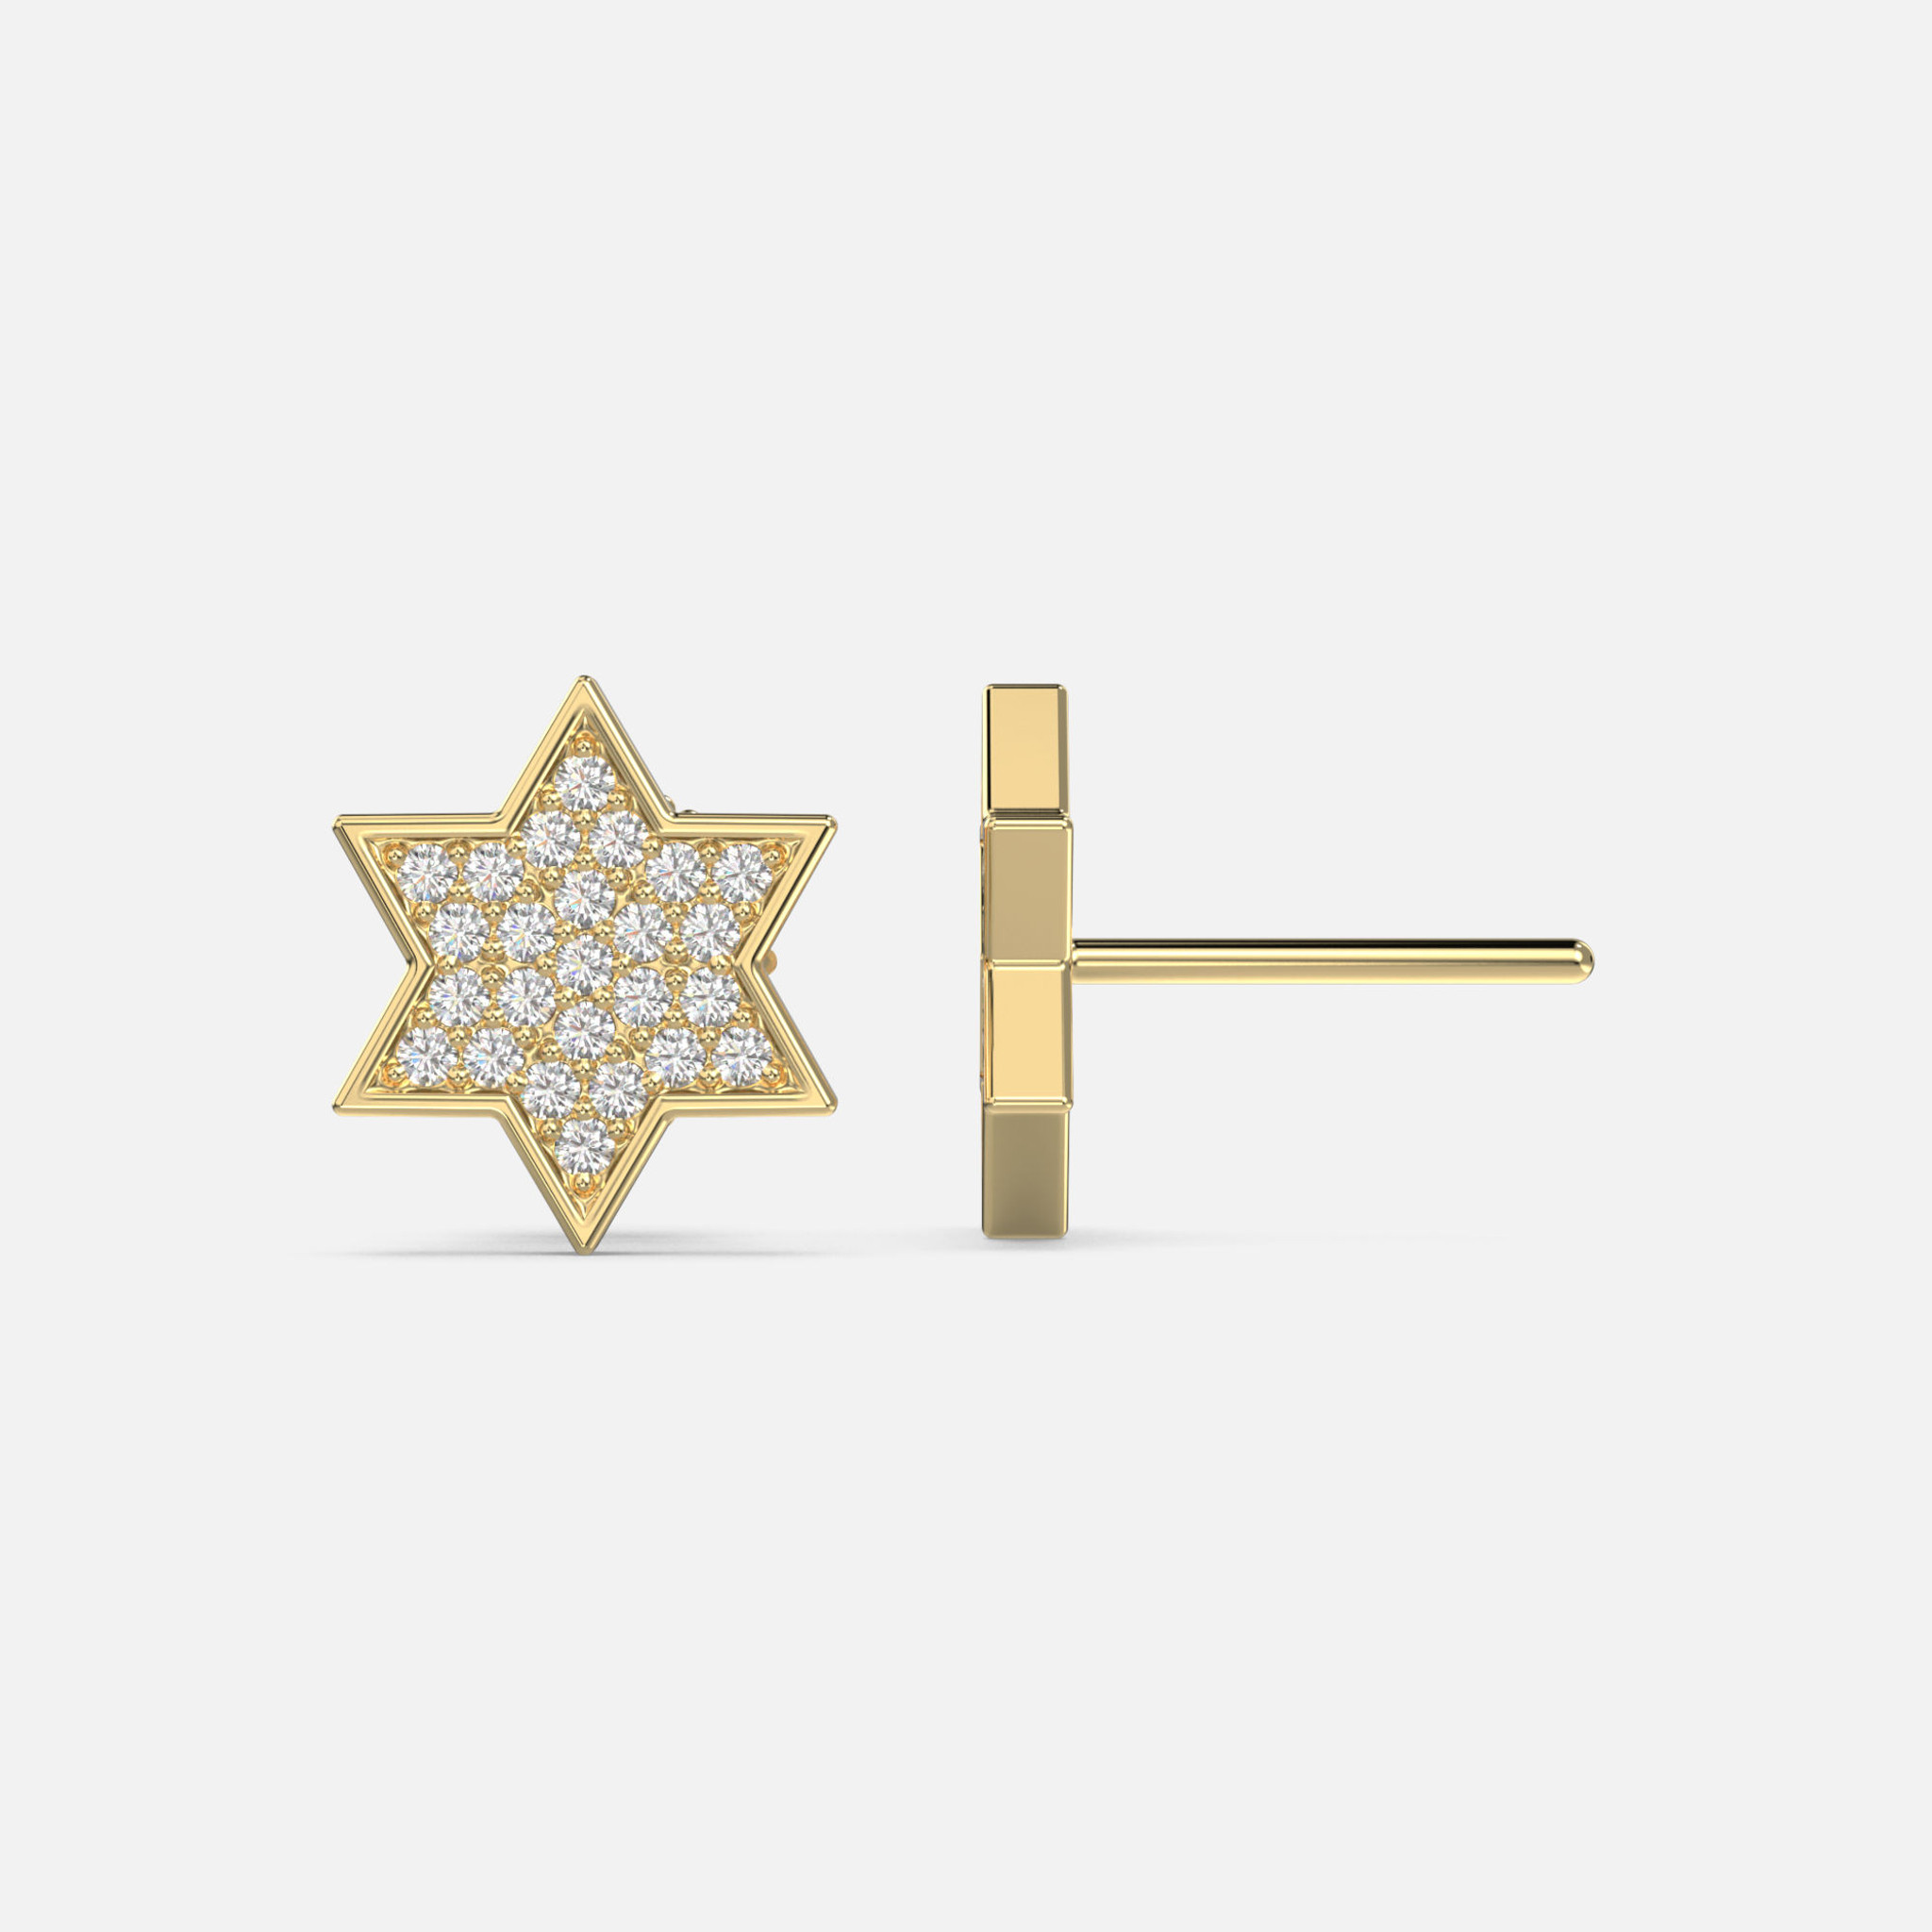 A side view of our Diamond Star of David Earrings, showcasing a one-of-a-kind Star of David design with 10mm width, adding significance and style.